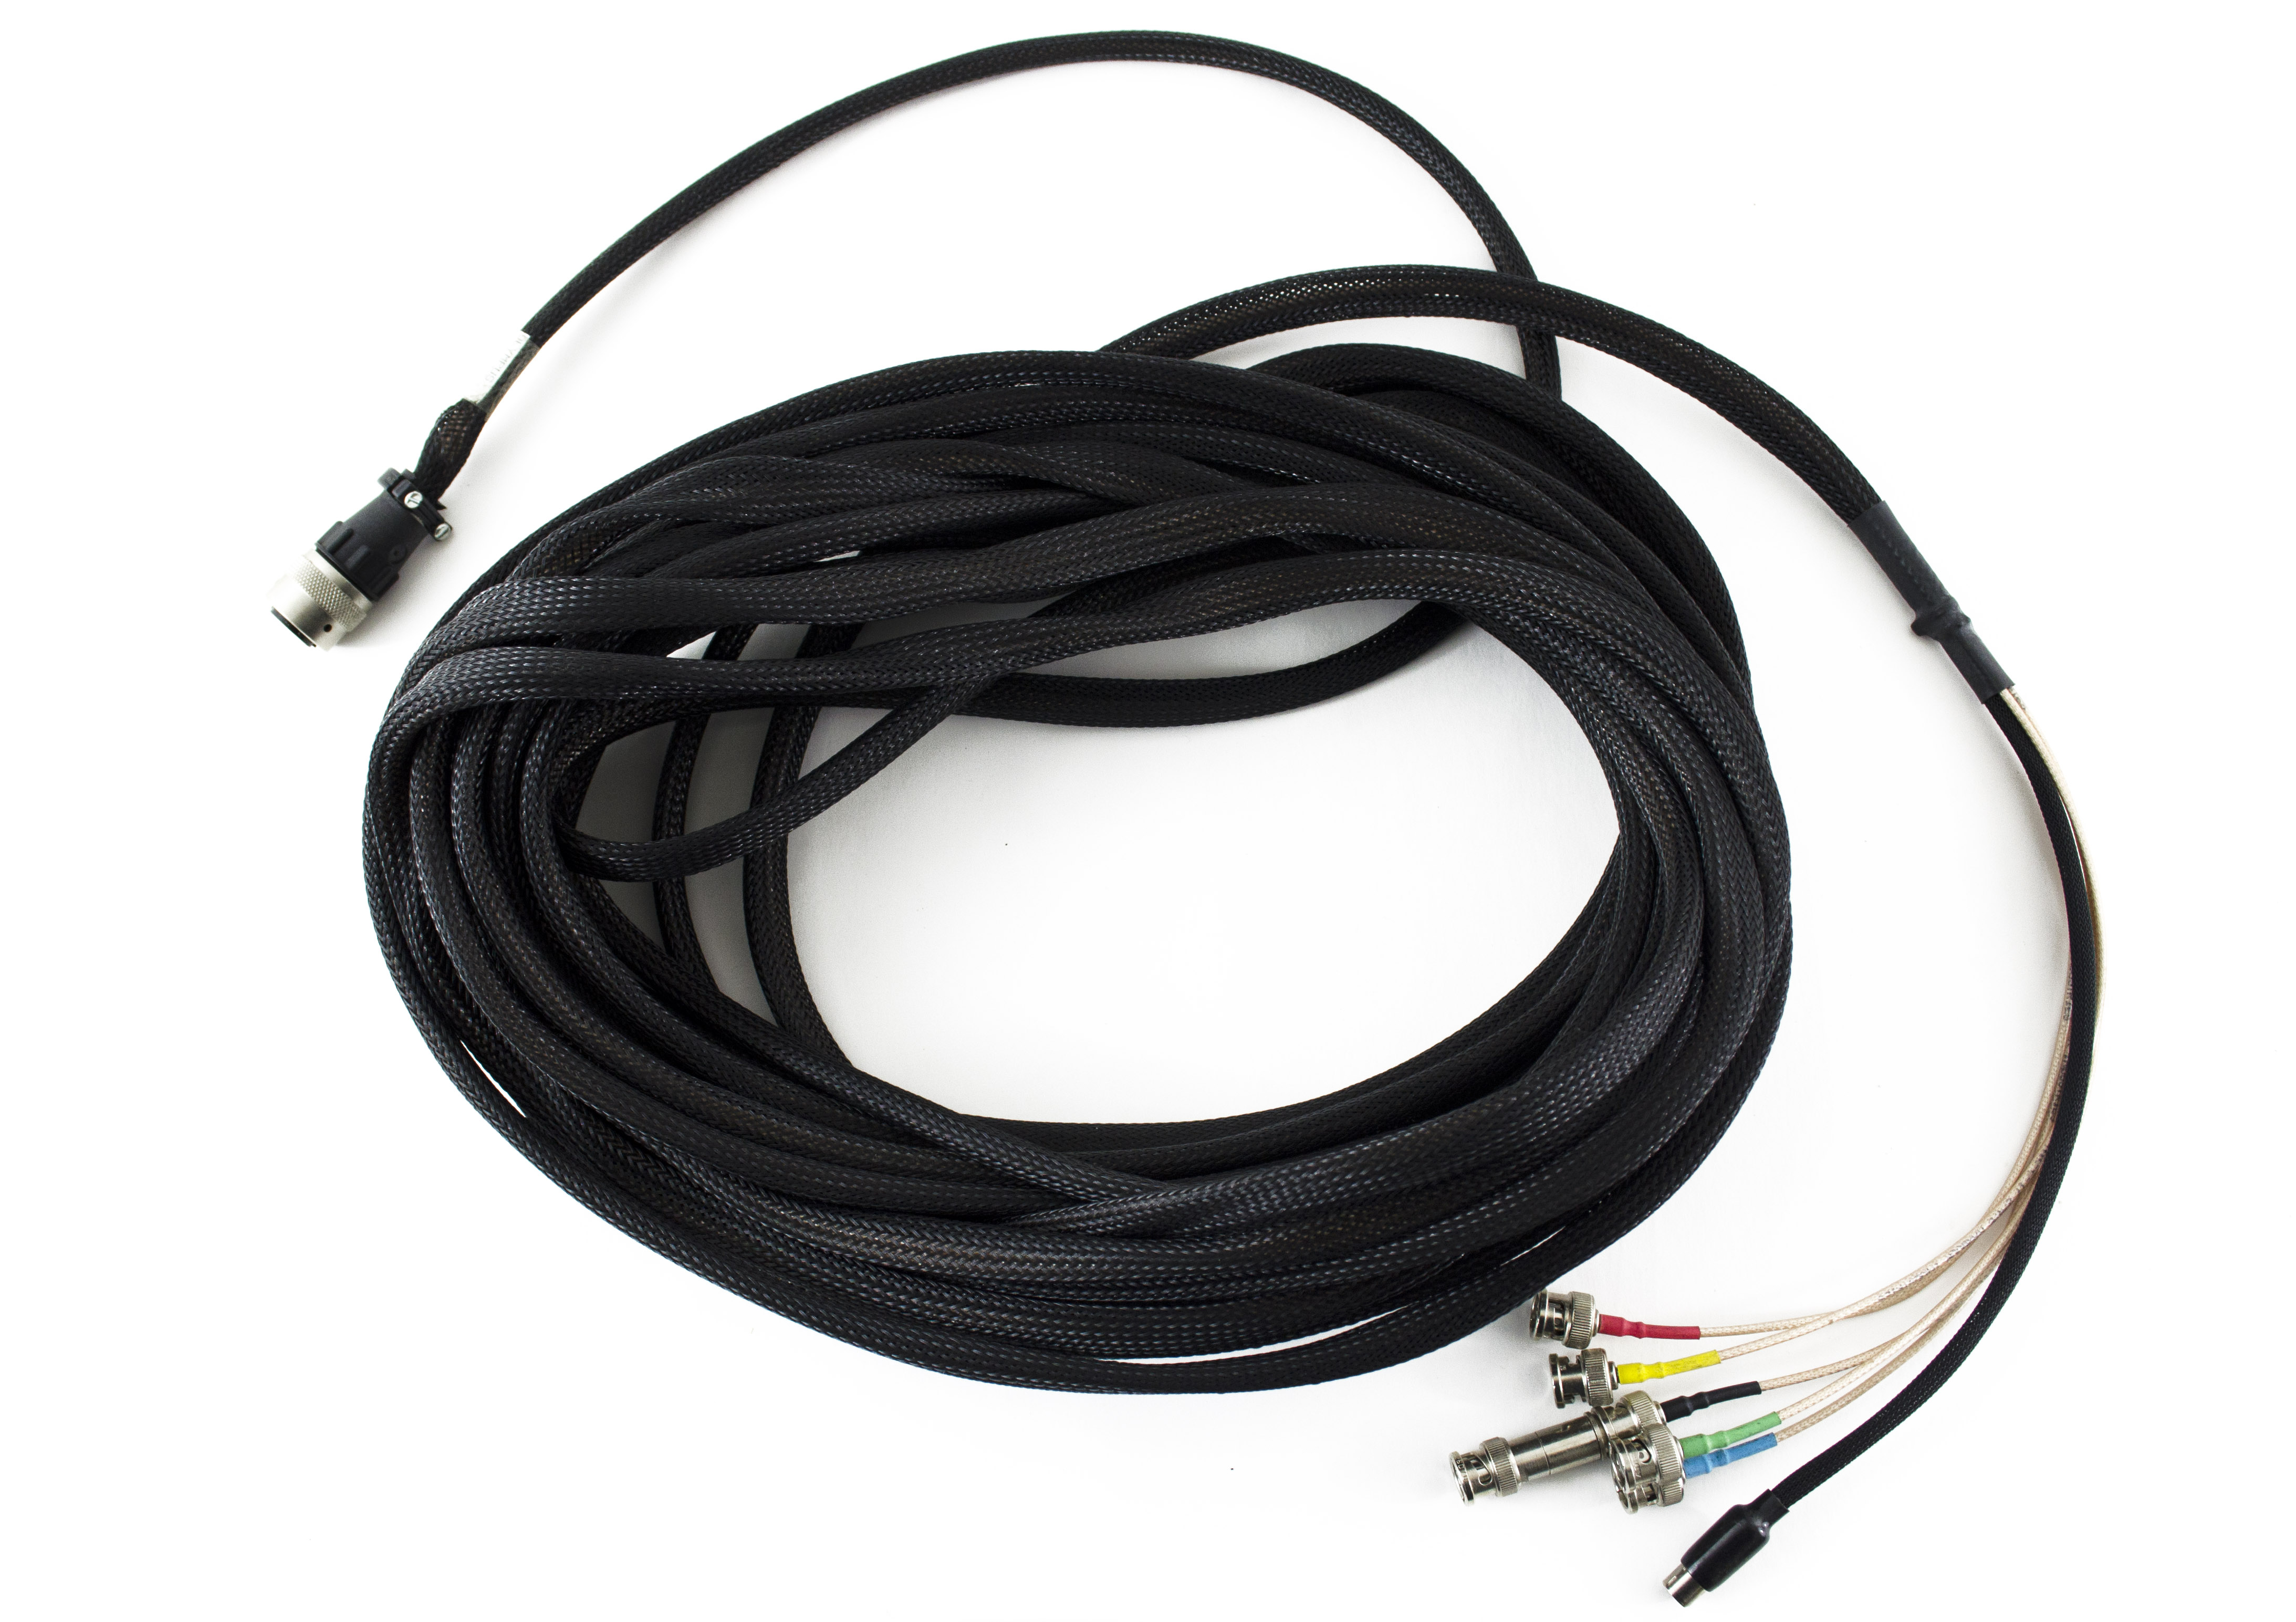 Olympus Video Monitor Cable - 55583L50 (50 ft.)